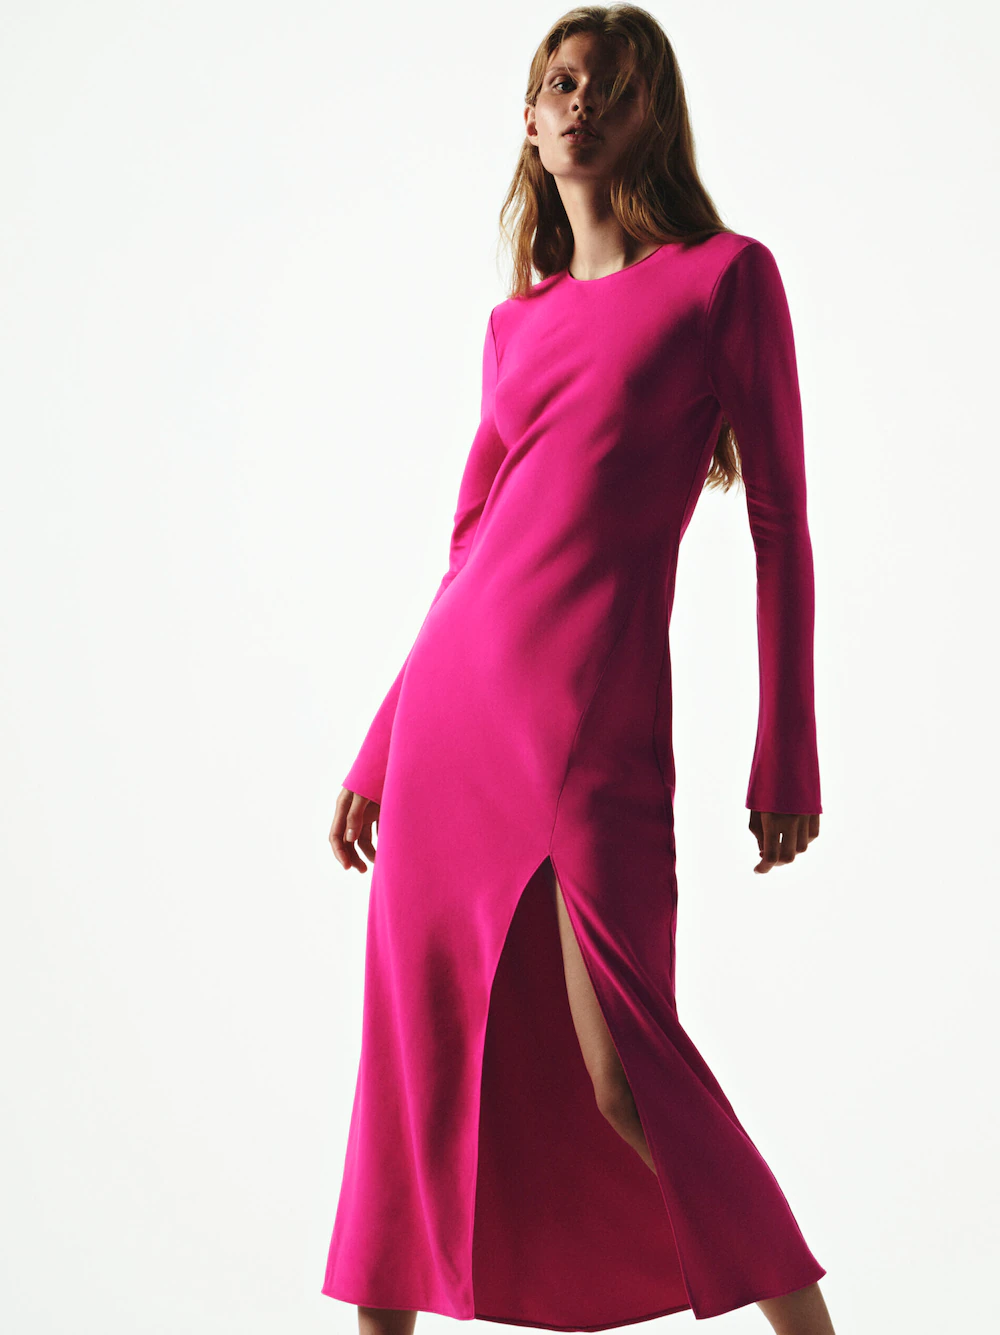 Massimo Dutti fuchsia Flowing fabric midi dress with long sleeves. It has a crew neck and a slit at the thigh. It closes with a zip fastening at the back. It has buttoned cuffs.
